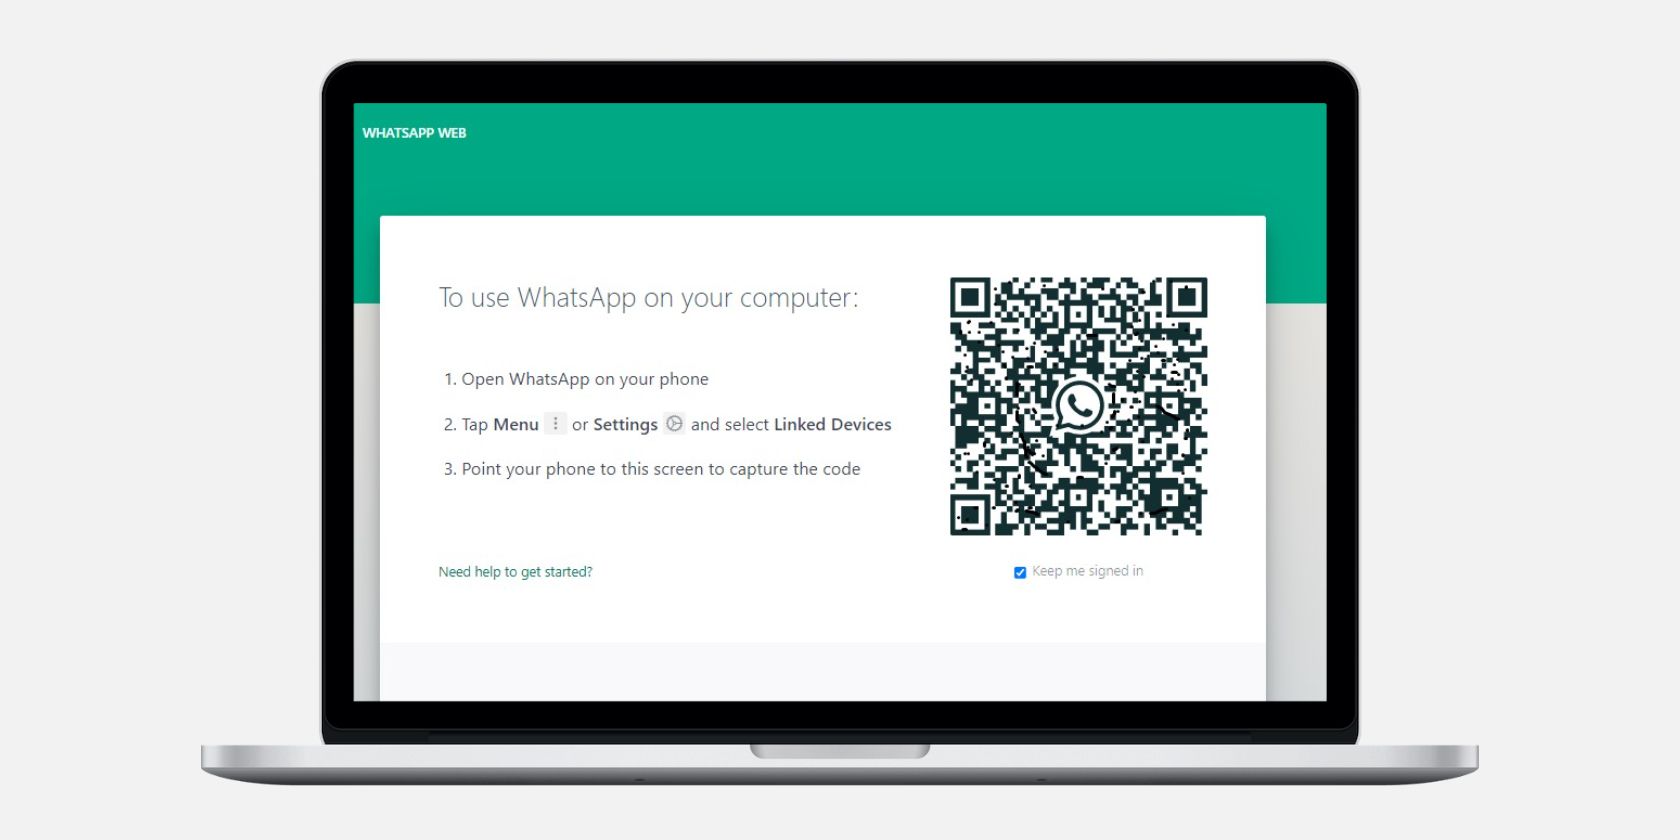 Mockup of WhatsWeb Homepage to Scan QR Code to Connect WhatsApp on a Laptop